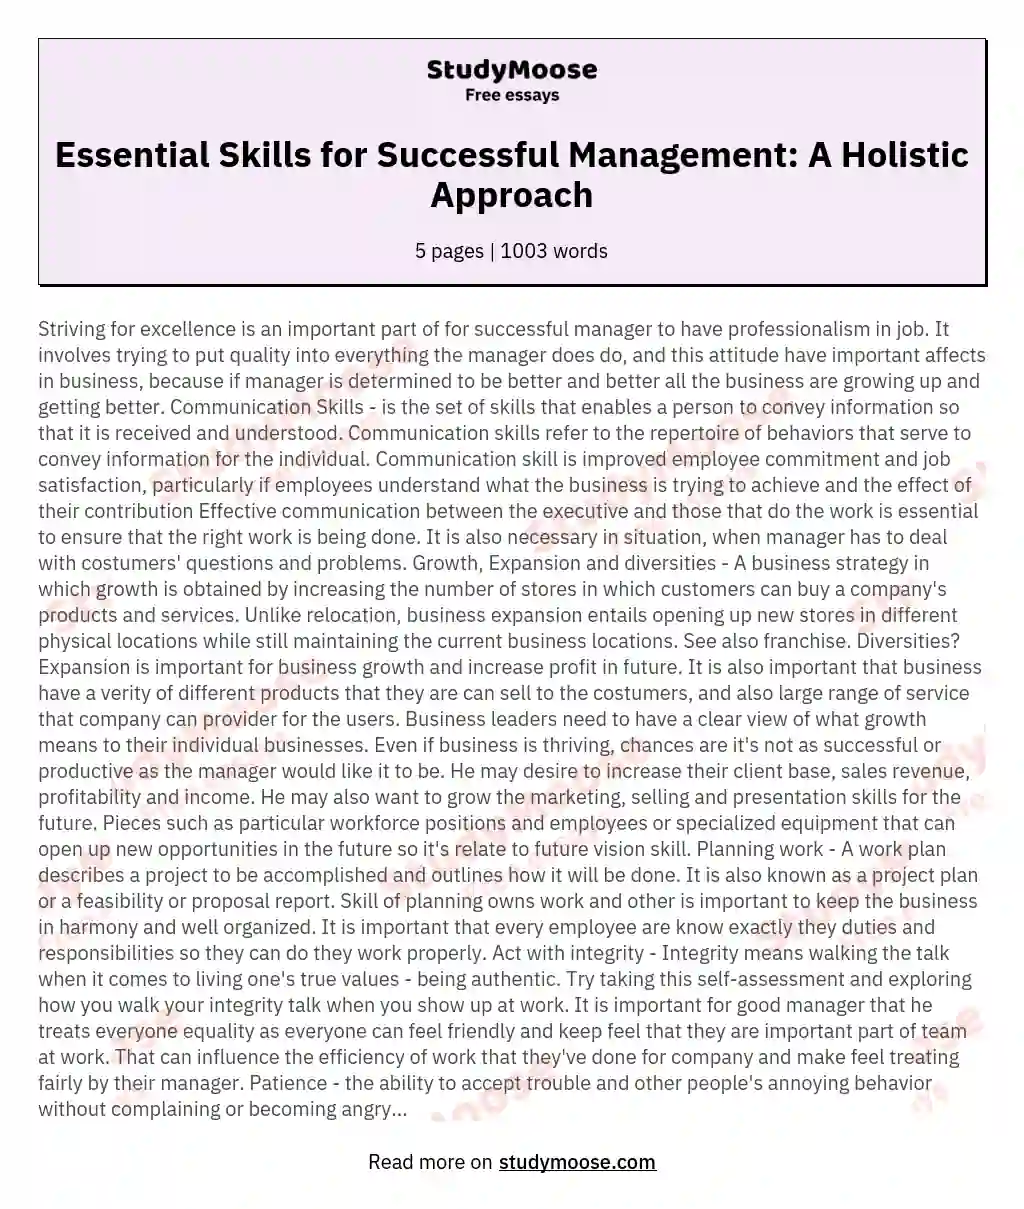 Essential Skills for Successful Management: A Holistic Approach essay